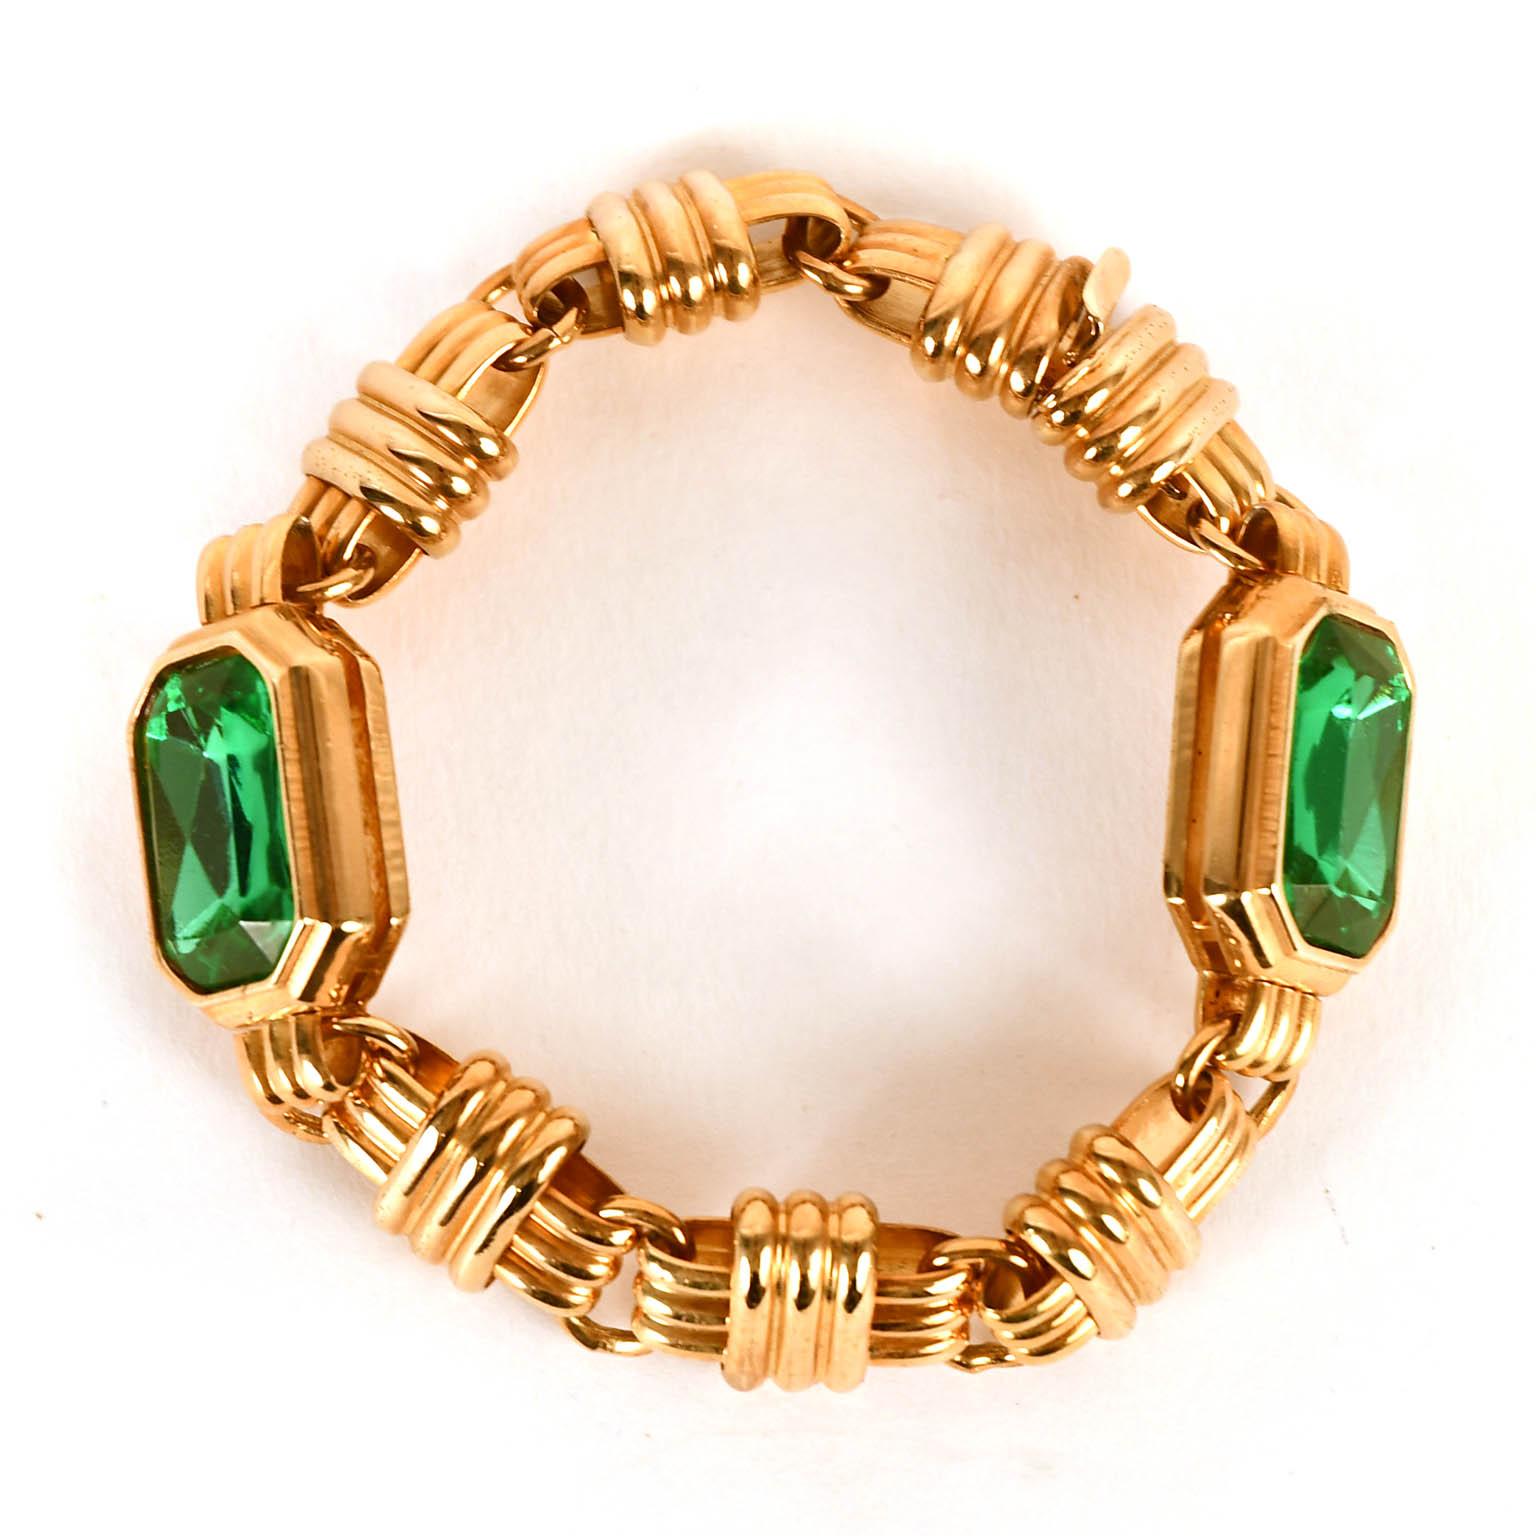 A marvelous bracelet from 1970-1980 designed by company Bijoux Cascio.

1948 Gaetana Cascio founded the company and since then all pieces were produced directly in Florence
Riccardo Cascio joined his father Gaetano's company in the 1960s.
Since